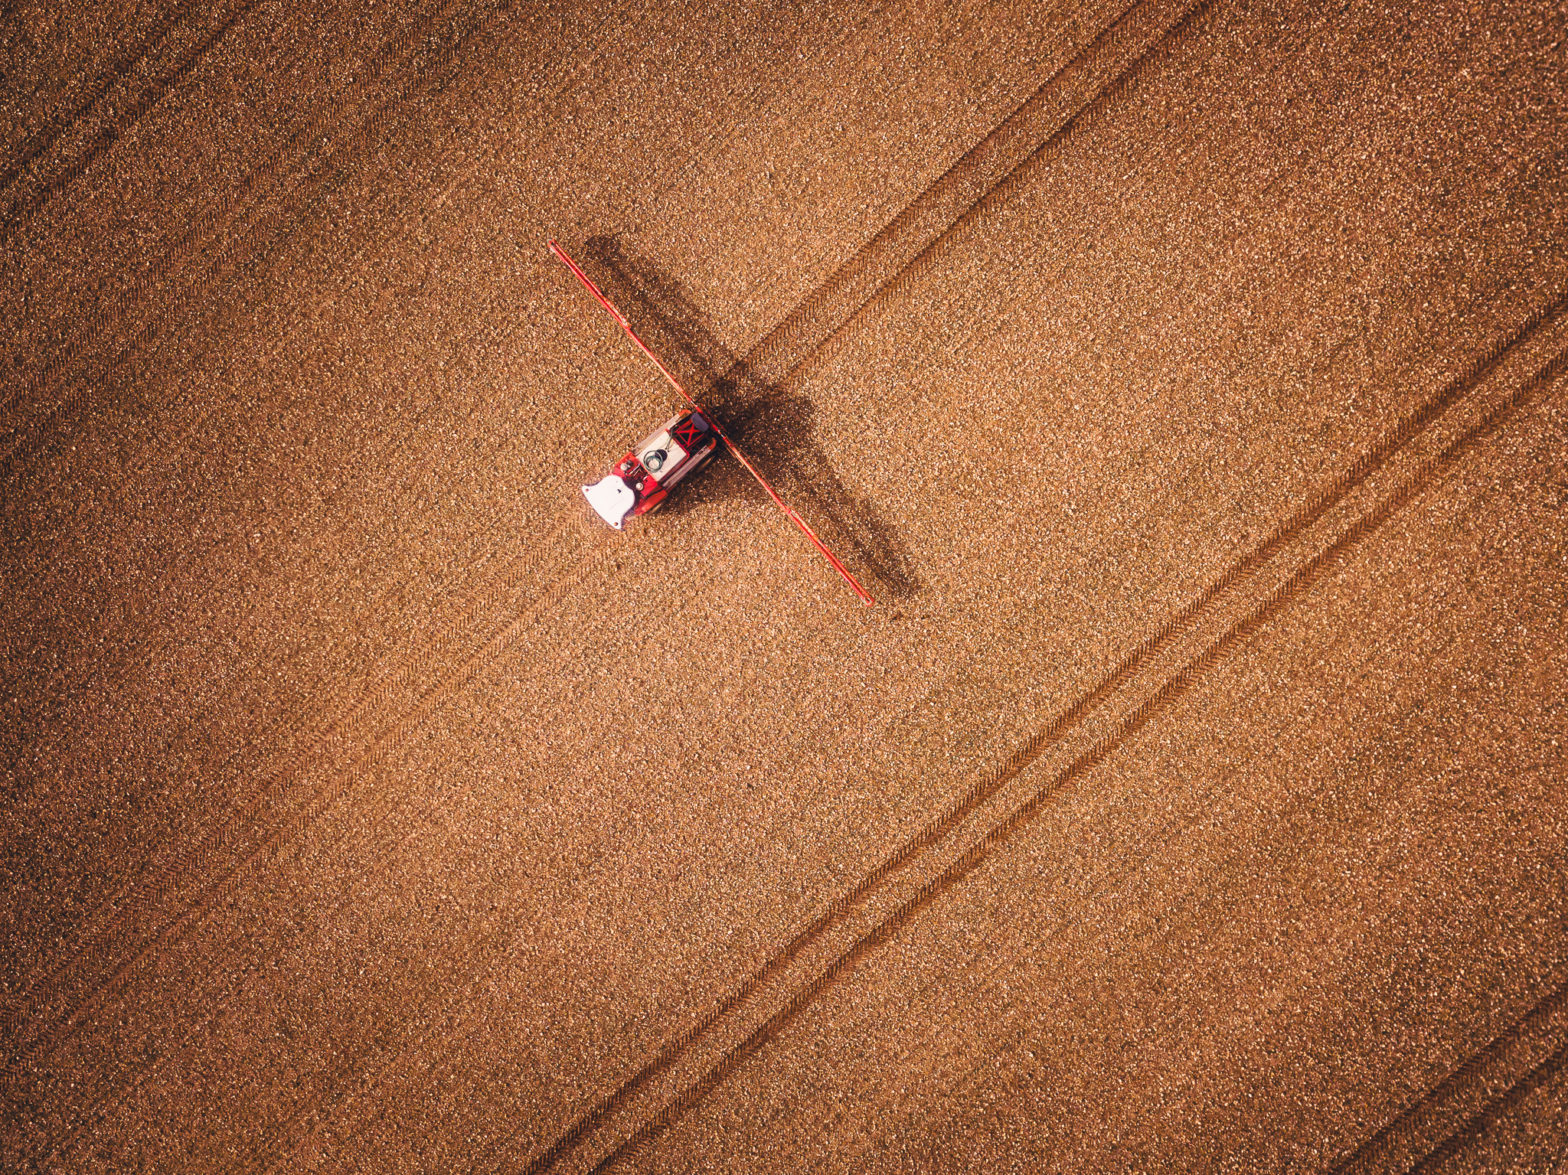 Heavy farmland machinery running through turned brown soil after the harvest